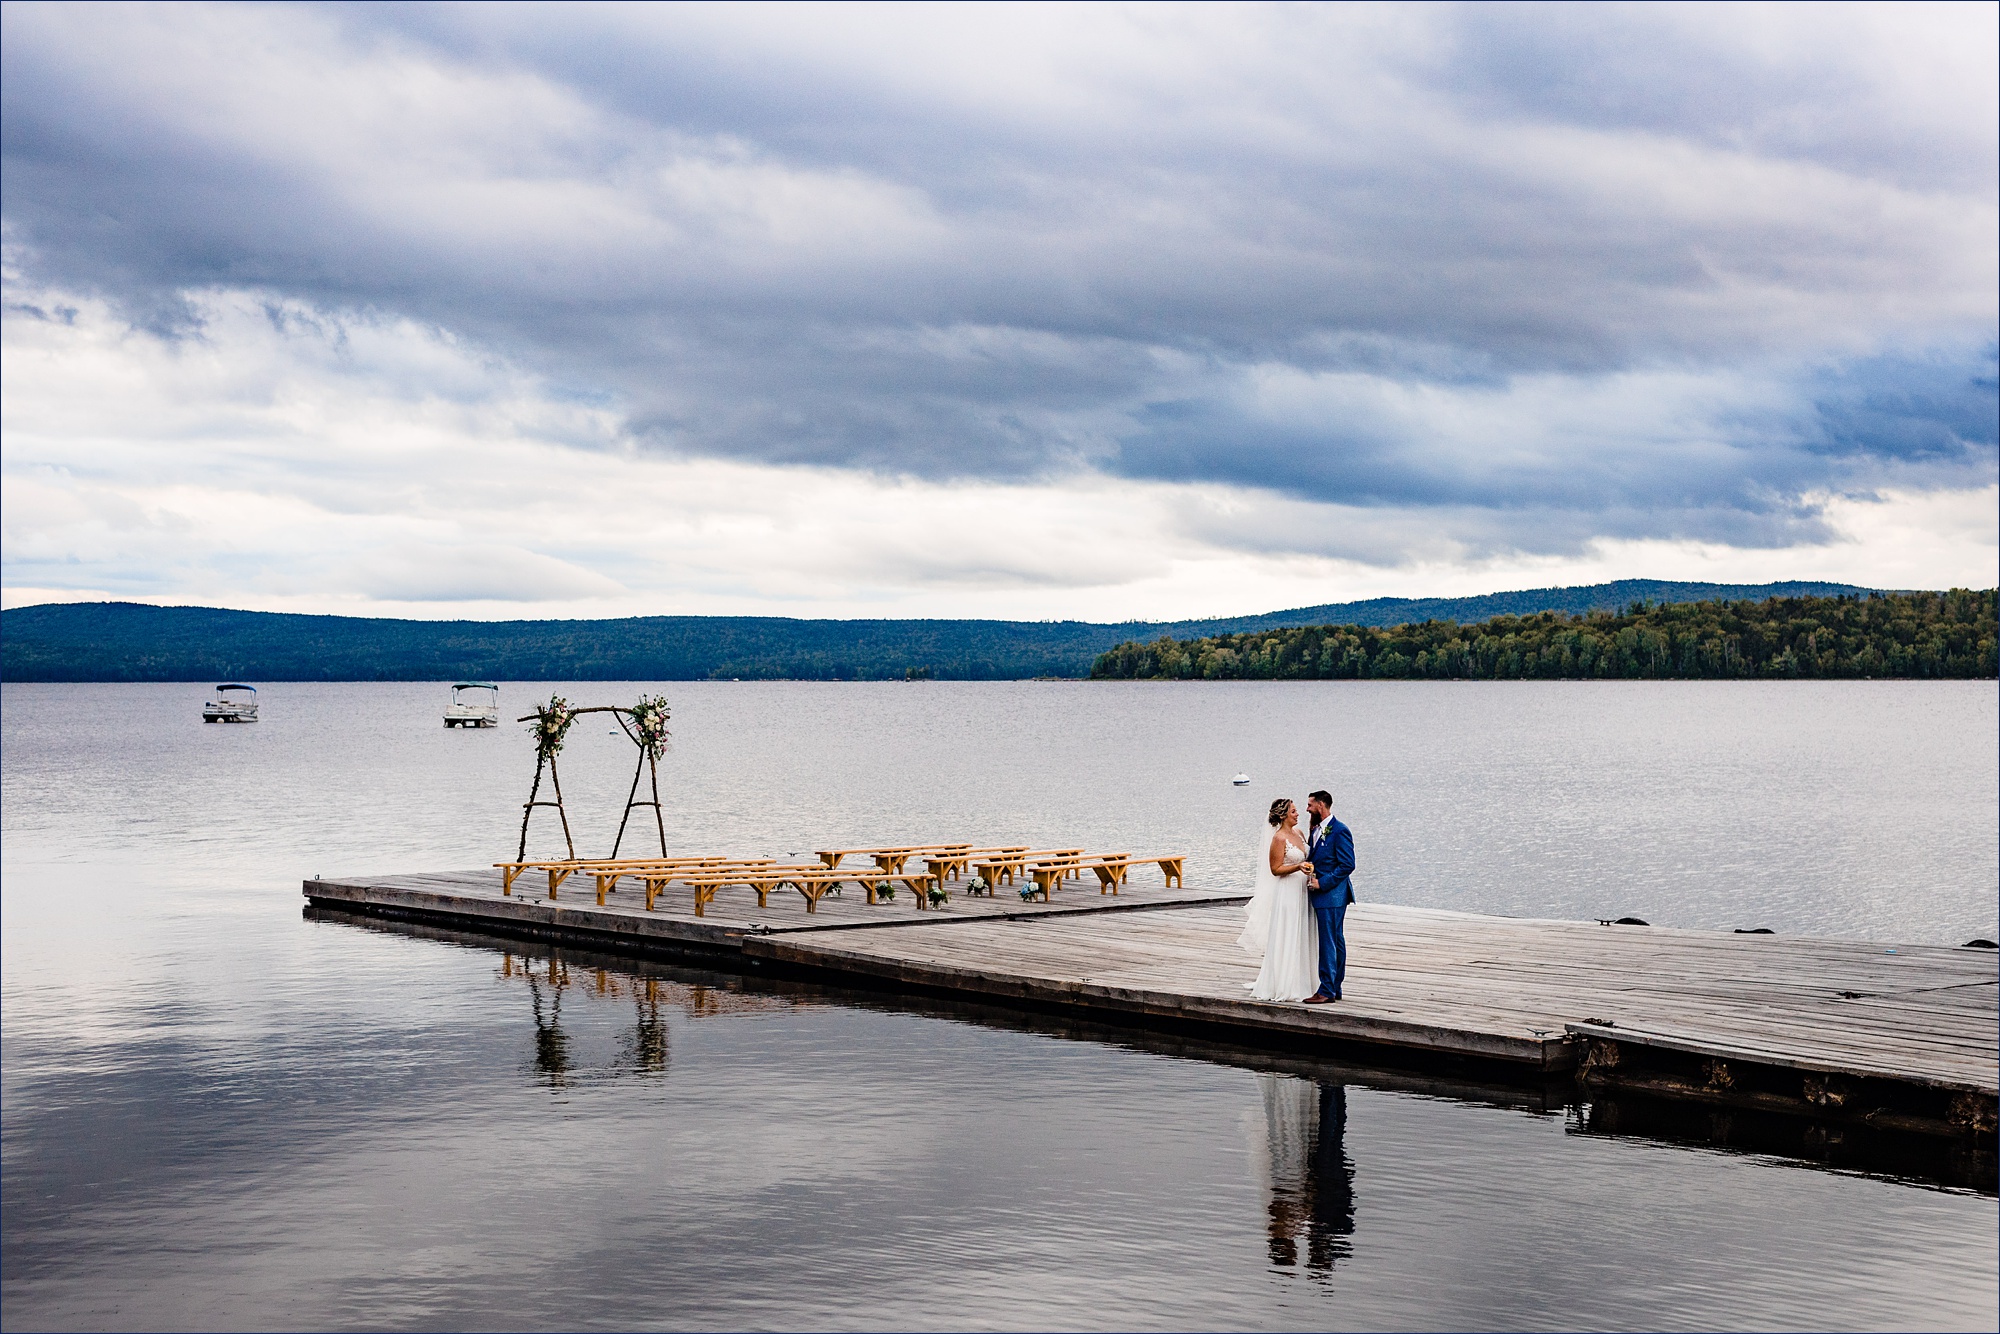 The bride and groom get close and take in a few quiet moments out on the docks in front of a Maine mountain range on their wedding day